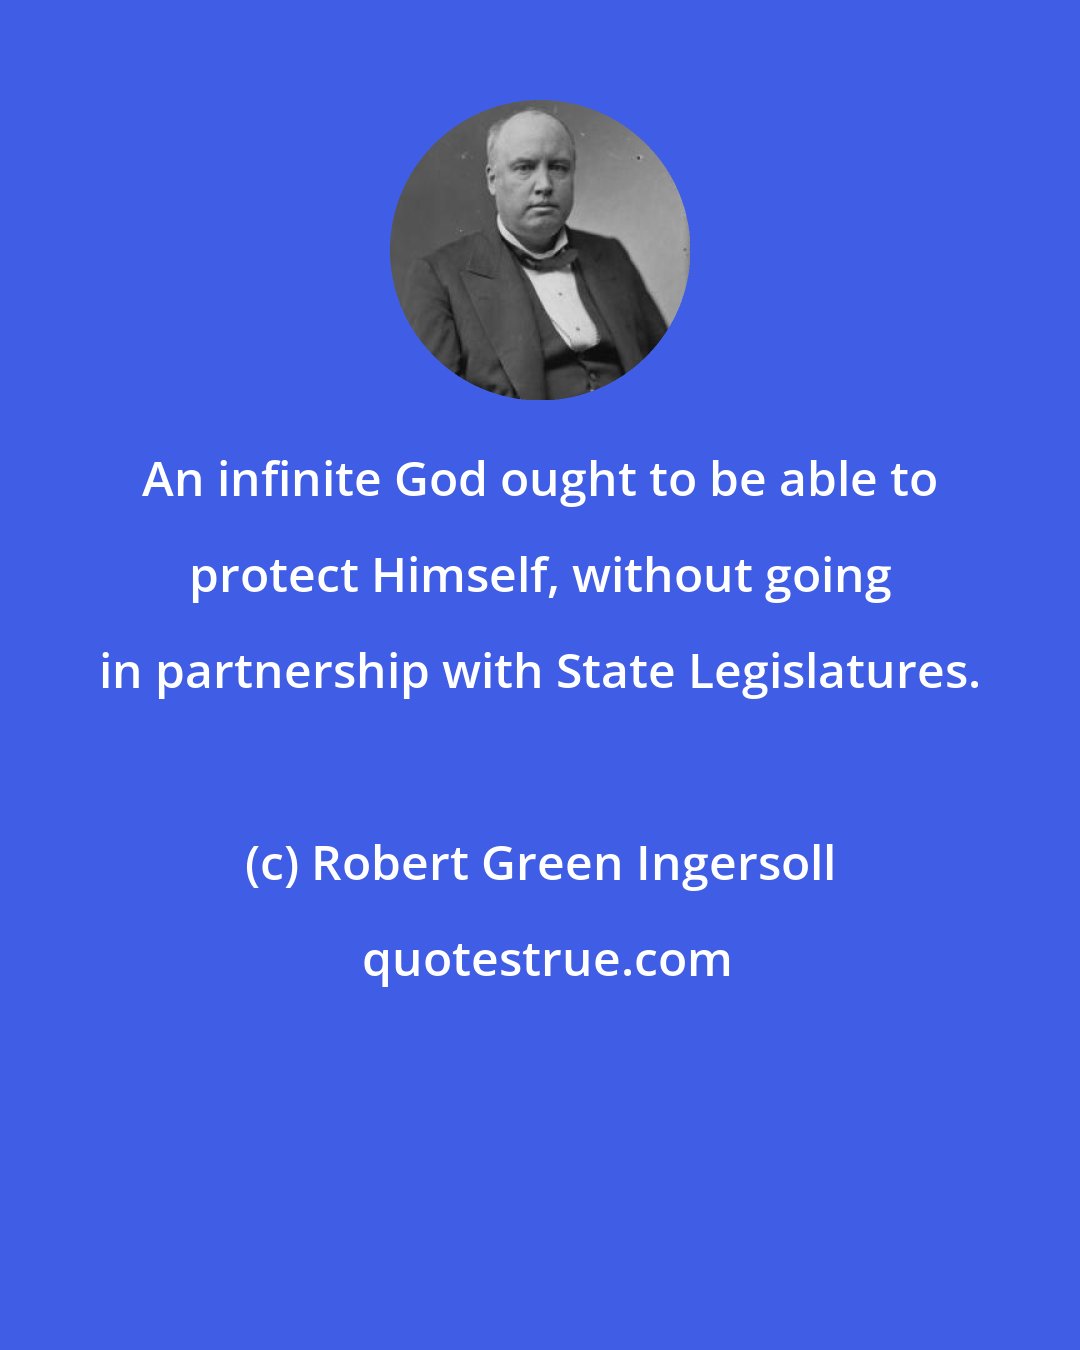 Robert Green Ingersoll: An infinite God ought to be able to protect Himself, without going in partnership with State Legislatures.